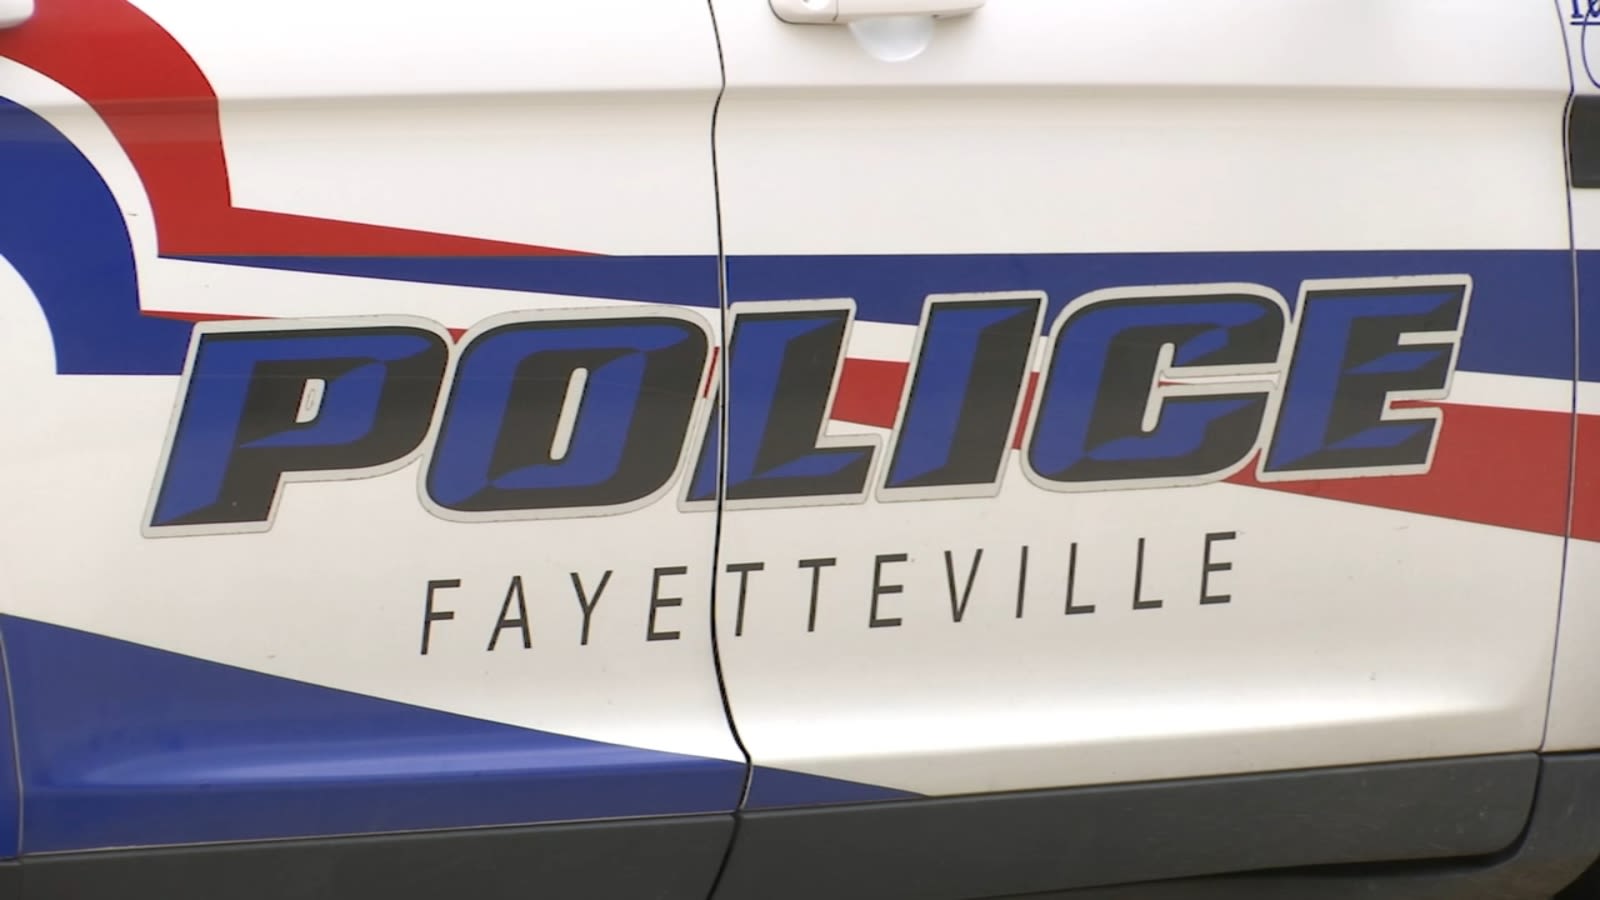 4 in custody for abduction of Fayetteville 18-year-old that sparked Ashanti Alert